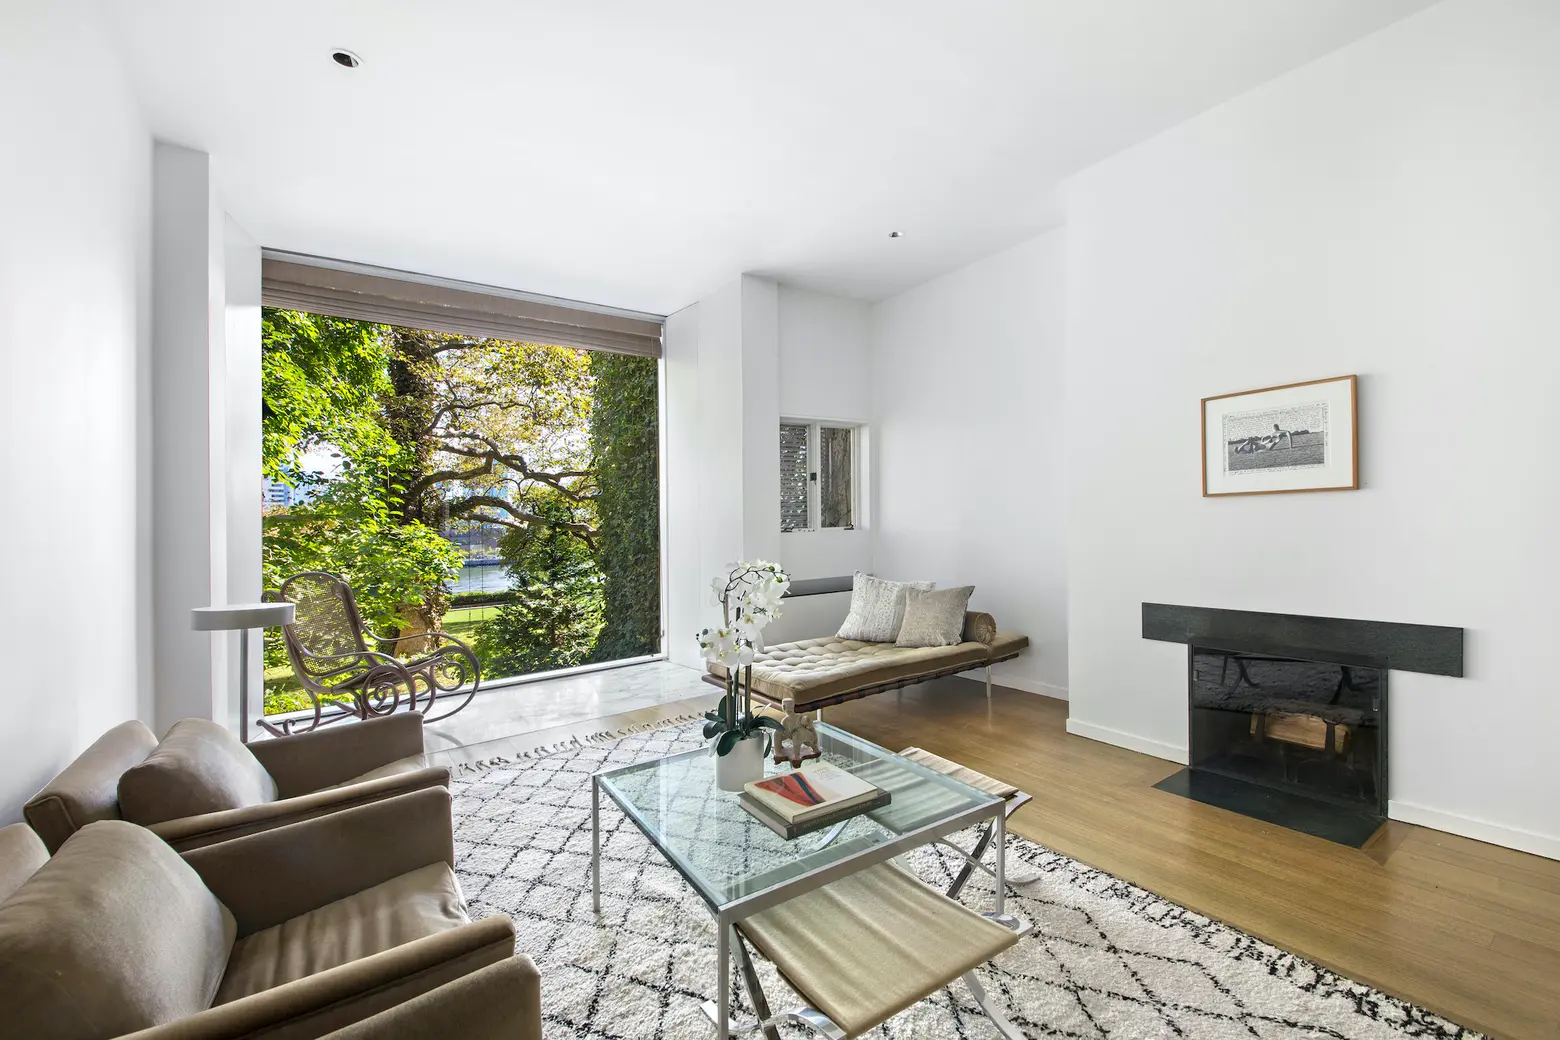 Late architect I.M. Pei’s self-designed Sutton Place townhouse hits the market for $8M